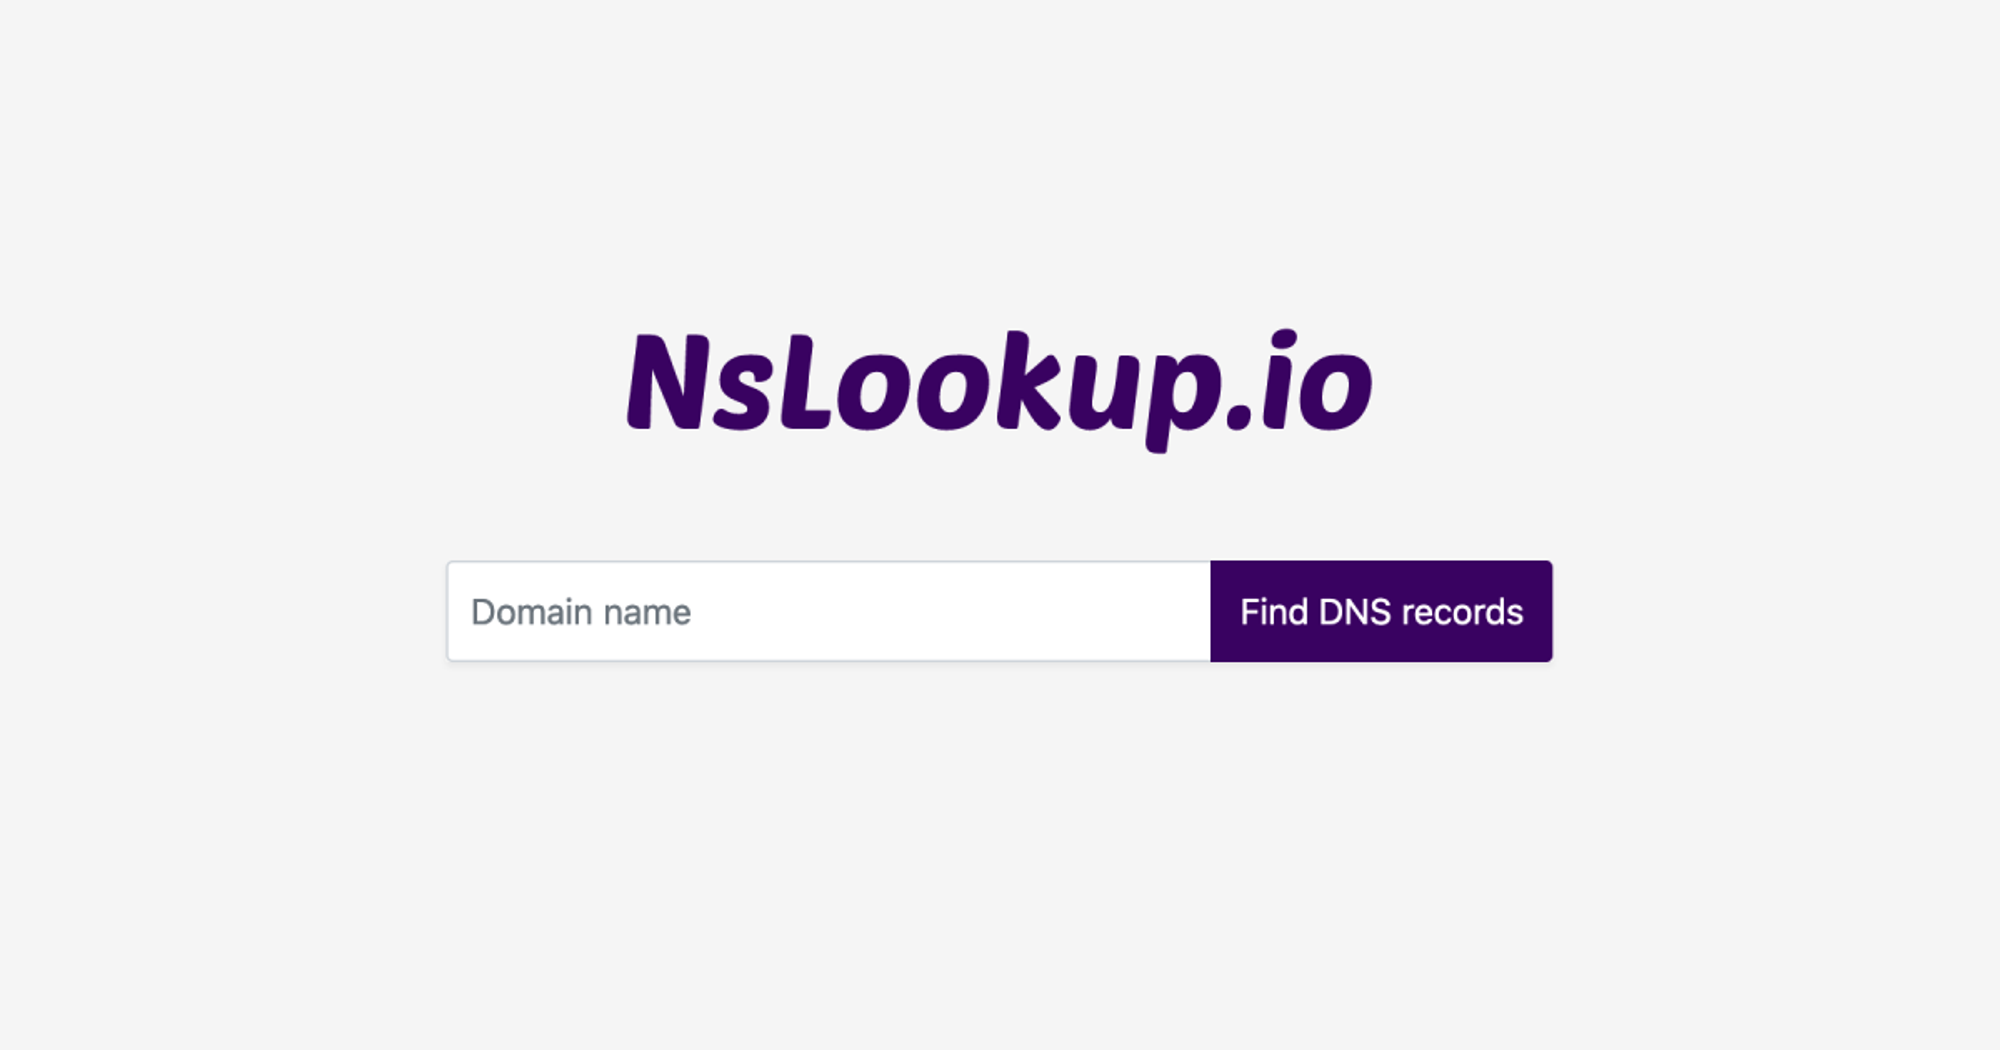 Online nslookup - Find DNS records